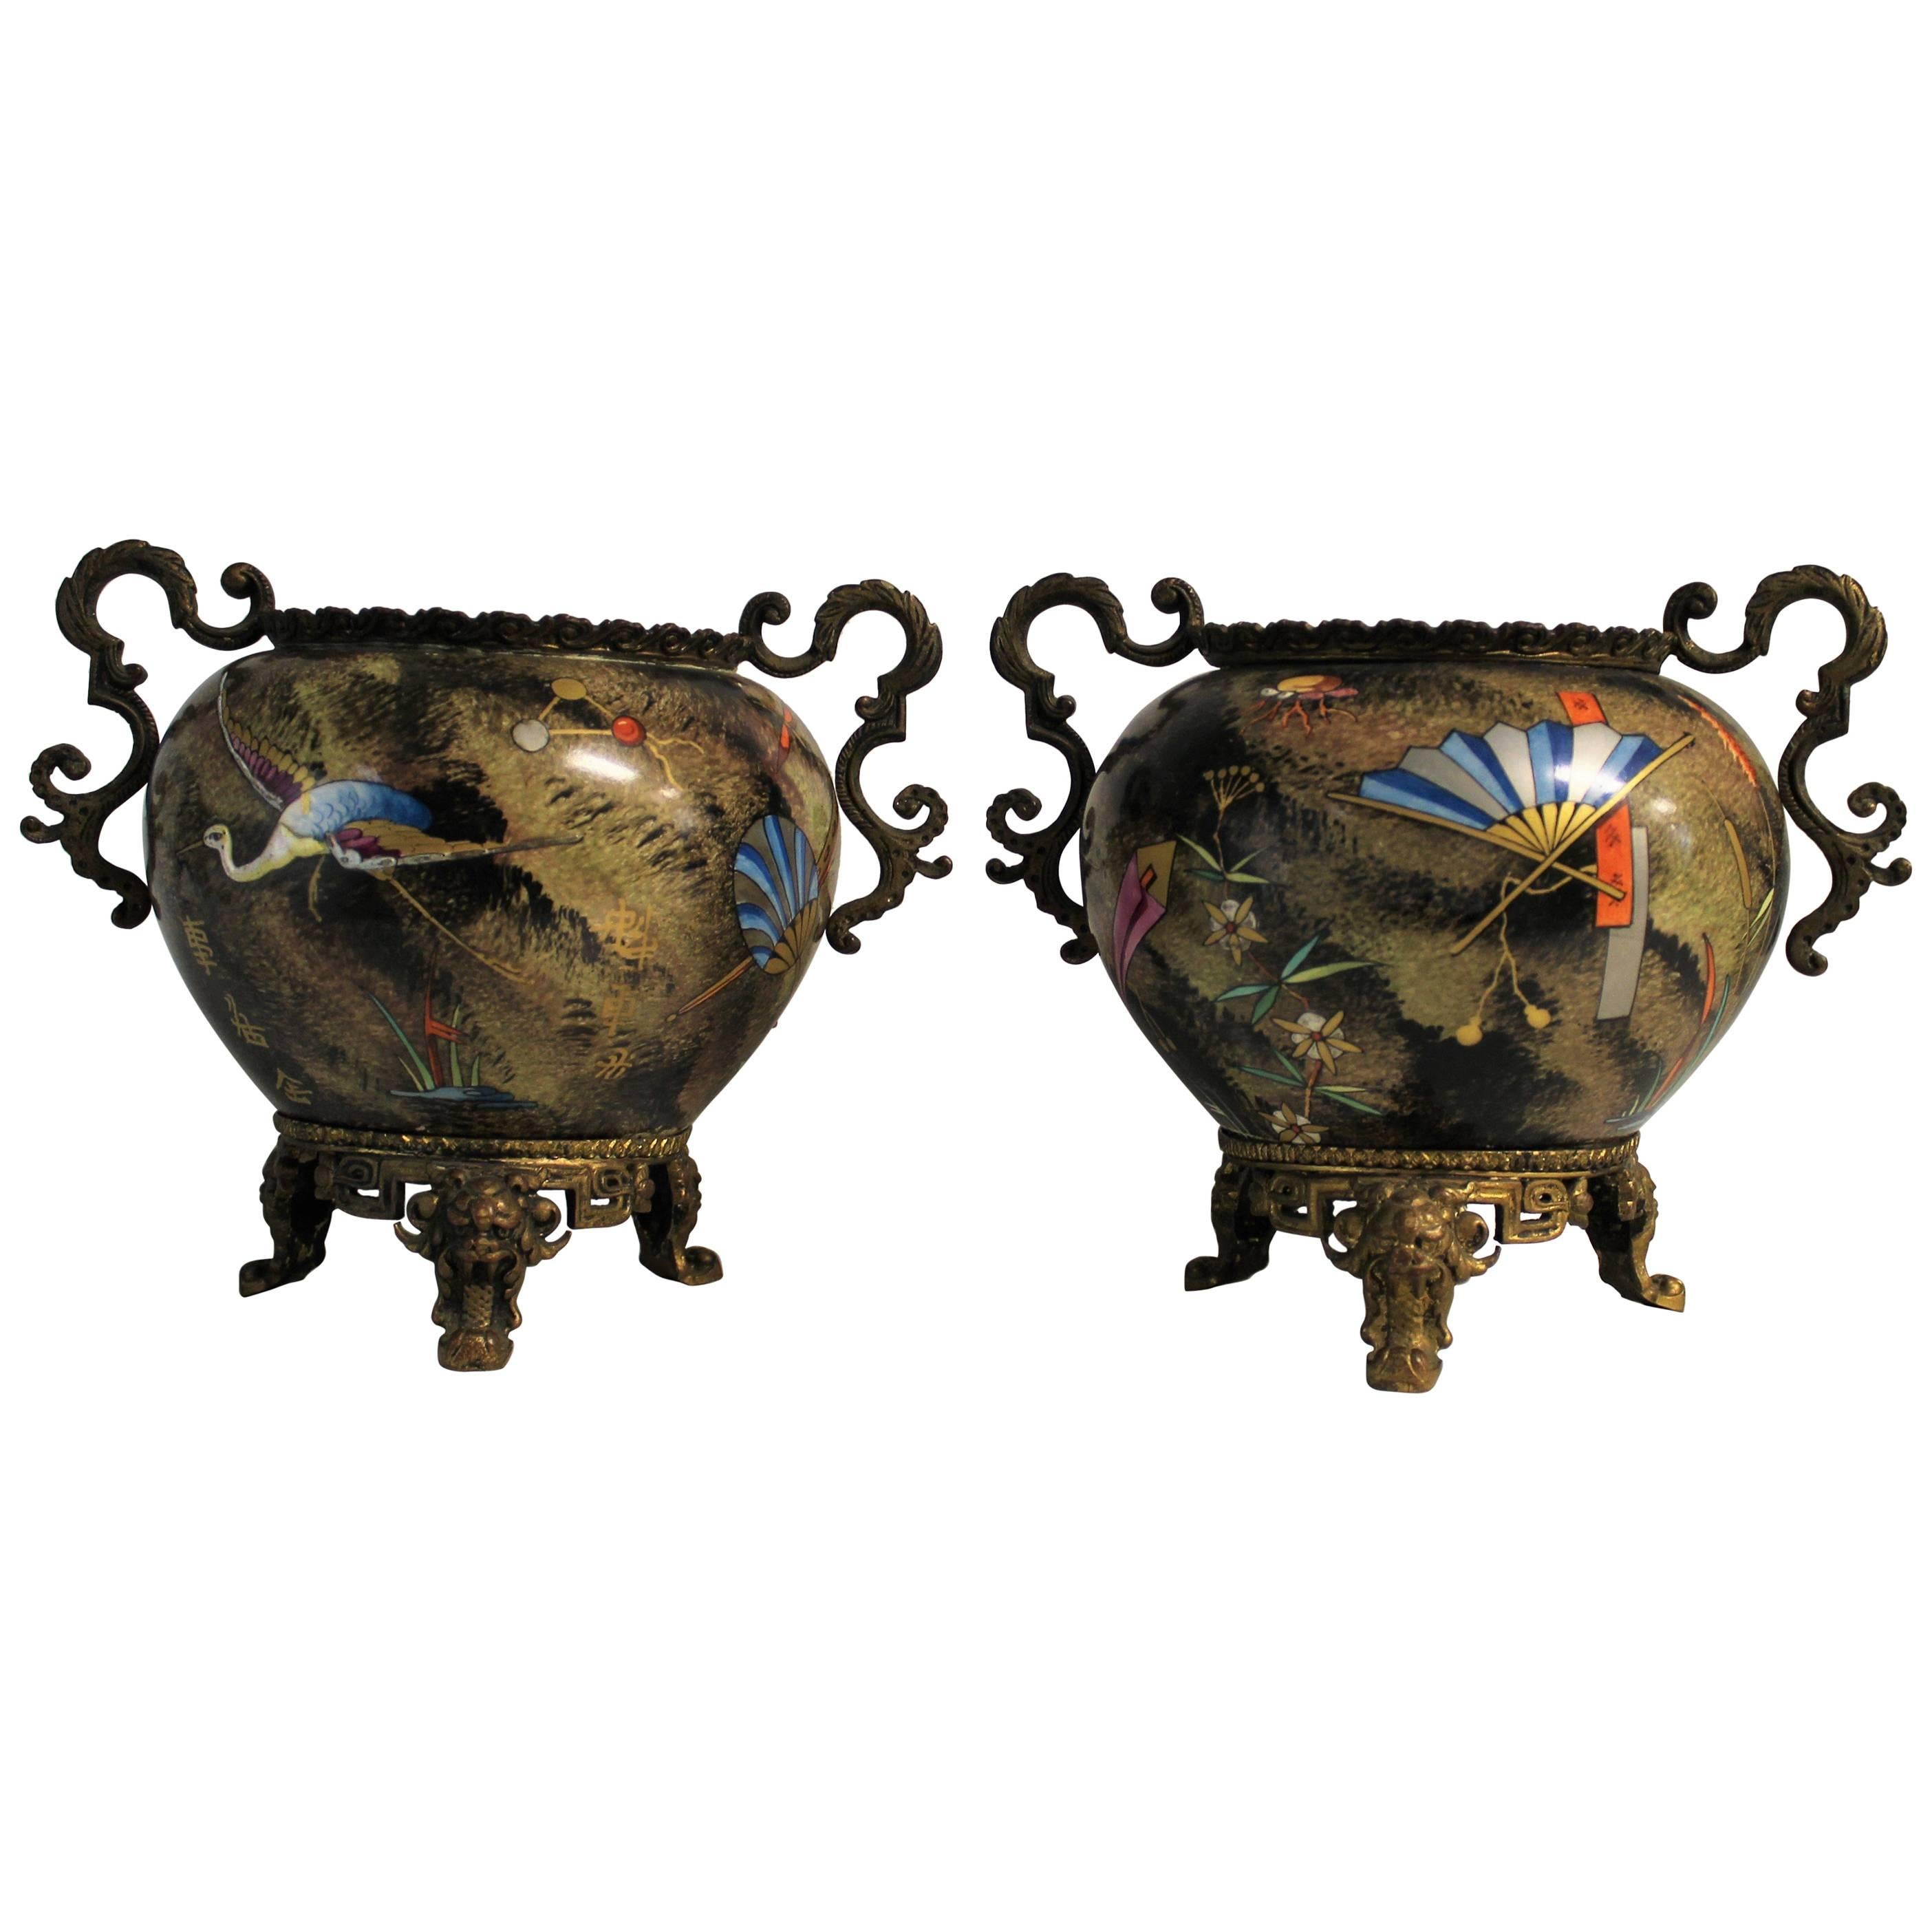 Pair of Japonisme Porcelain and Ormolu Mounted Aesthethic Movement Vase's